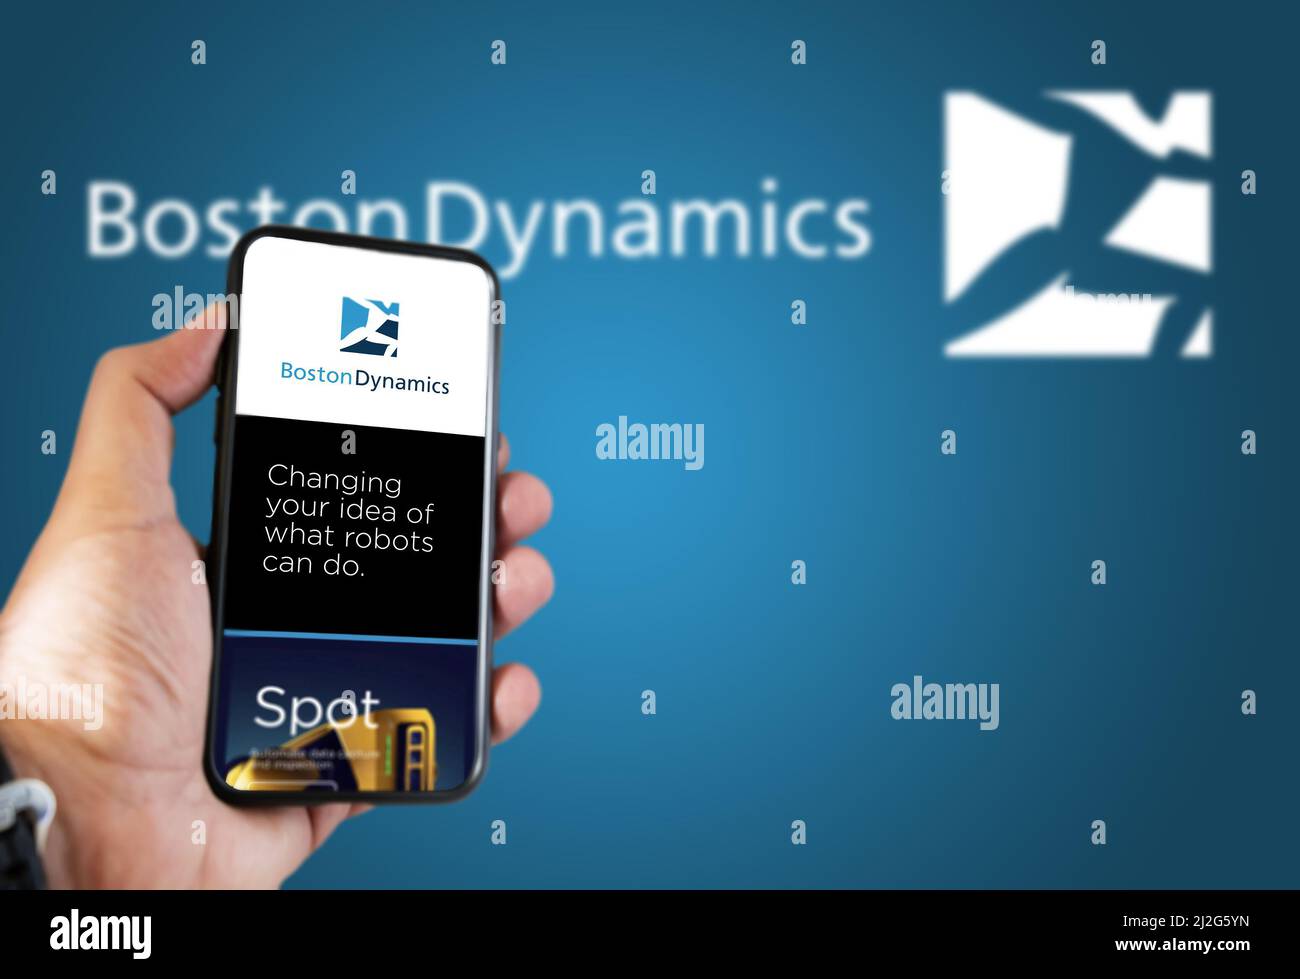 Waltham, MA, USA March 2022: Boston Dynamics company’s website on a phone screen. Blue background with Boston Dynamics logo blurred in the background. Stock Photo